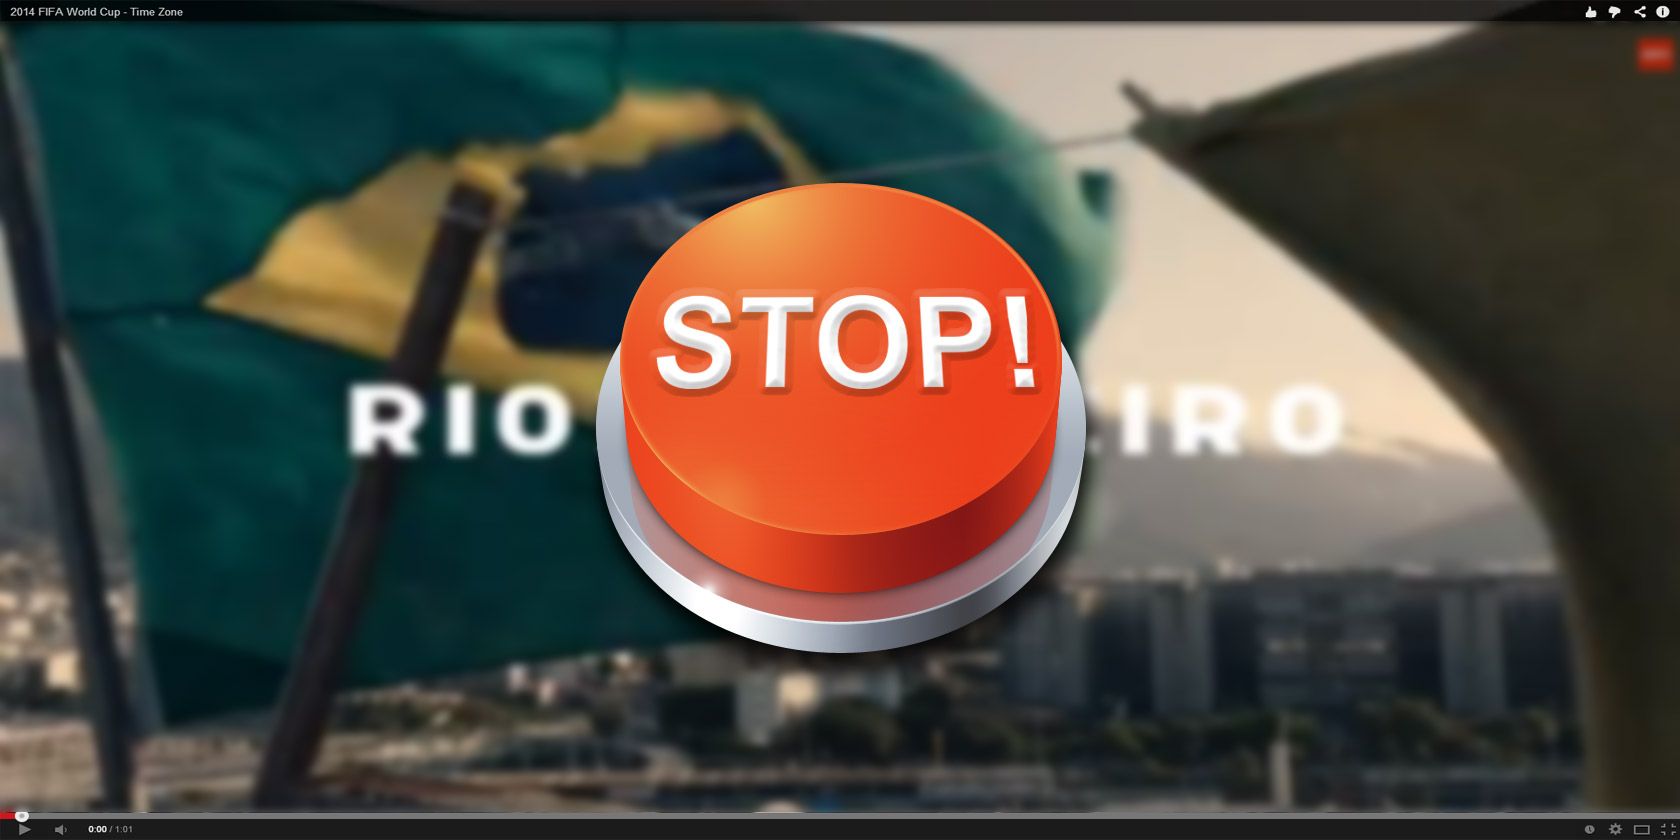 stop video autoplay on chrome for mac?